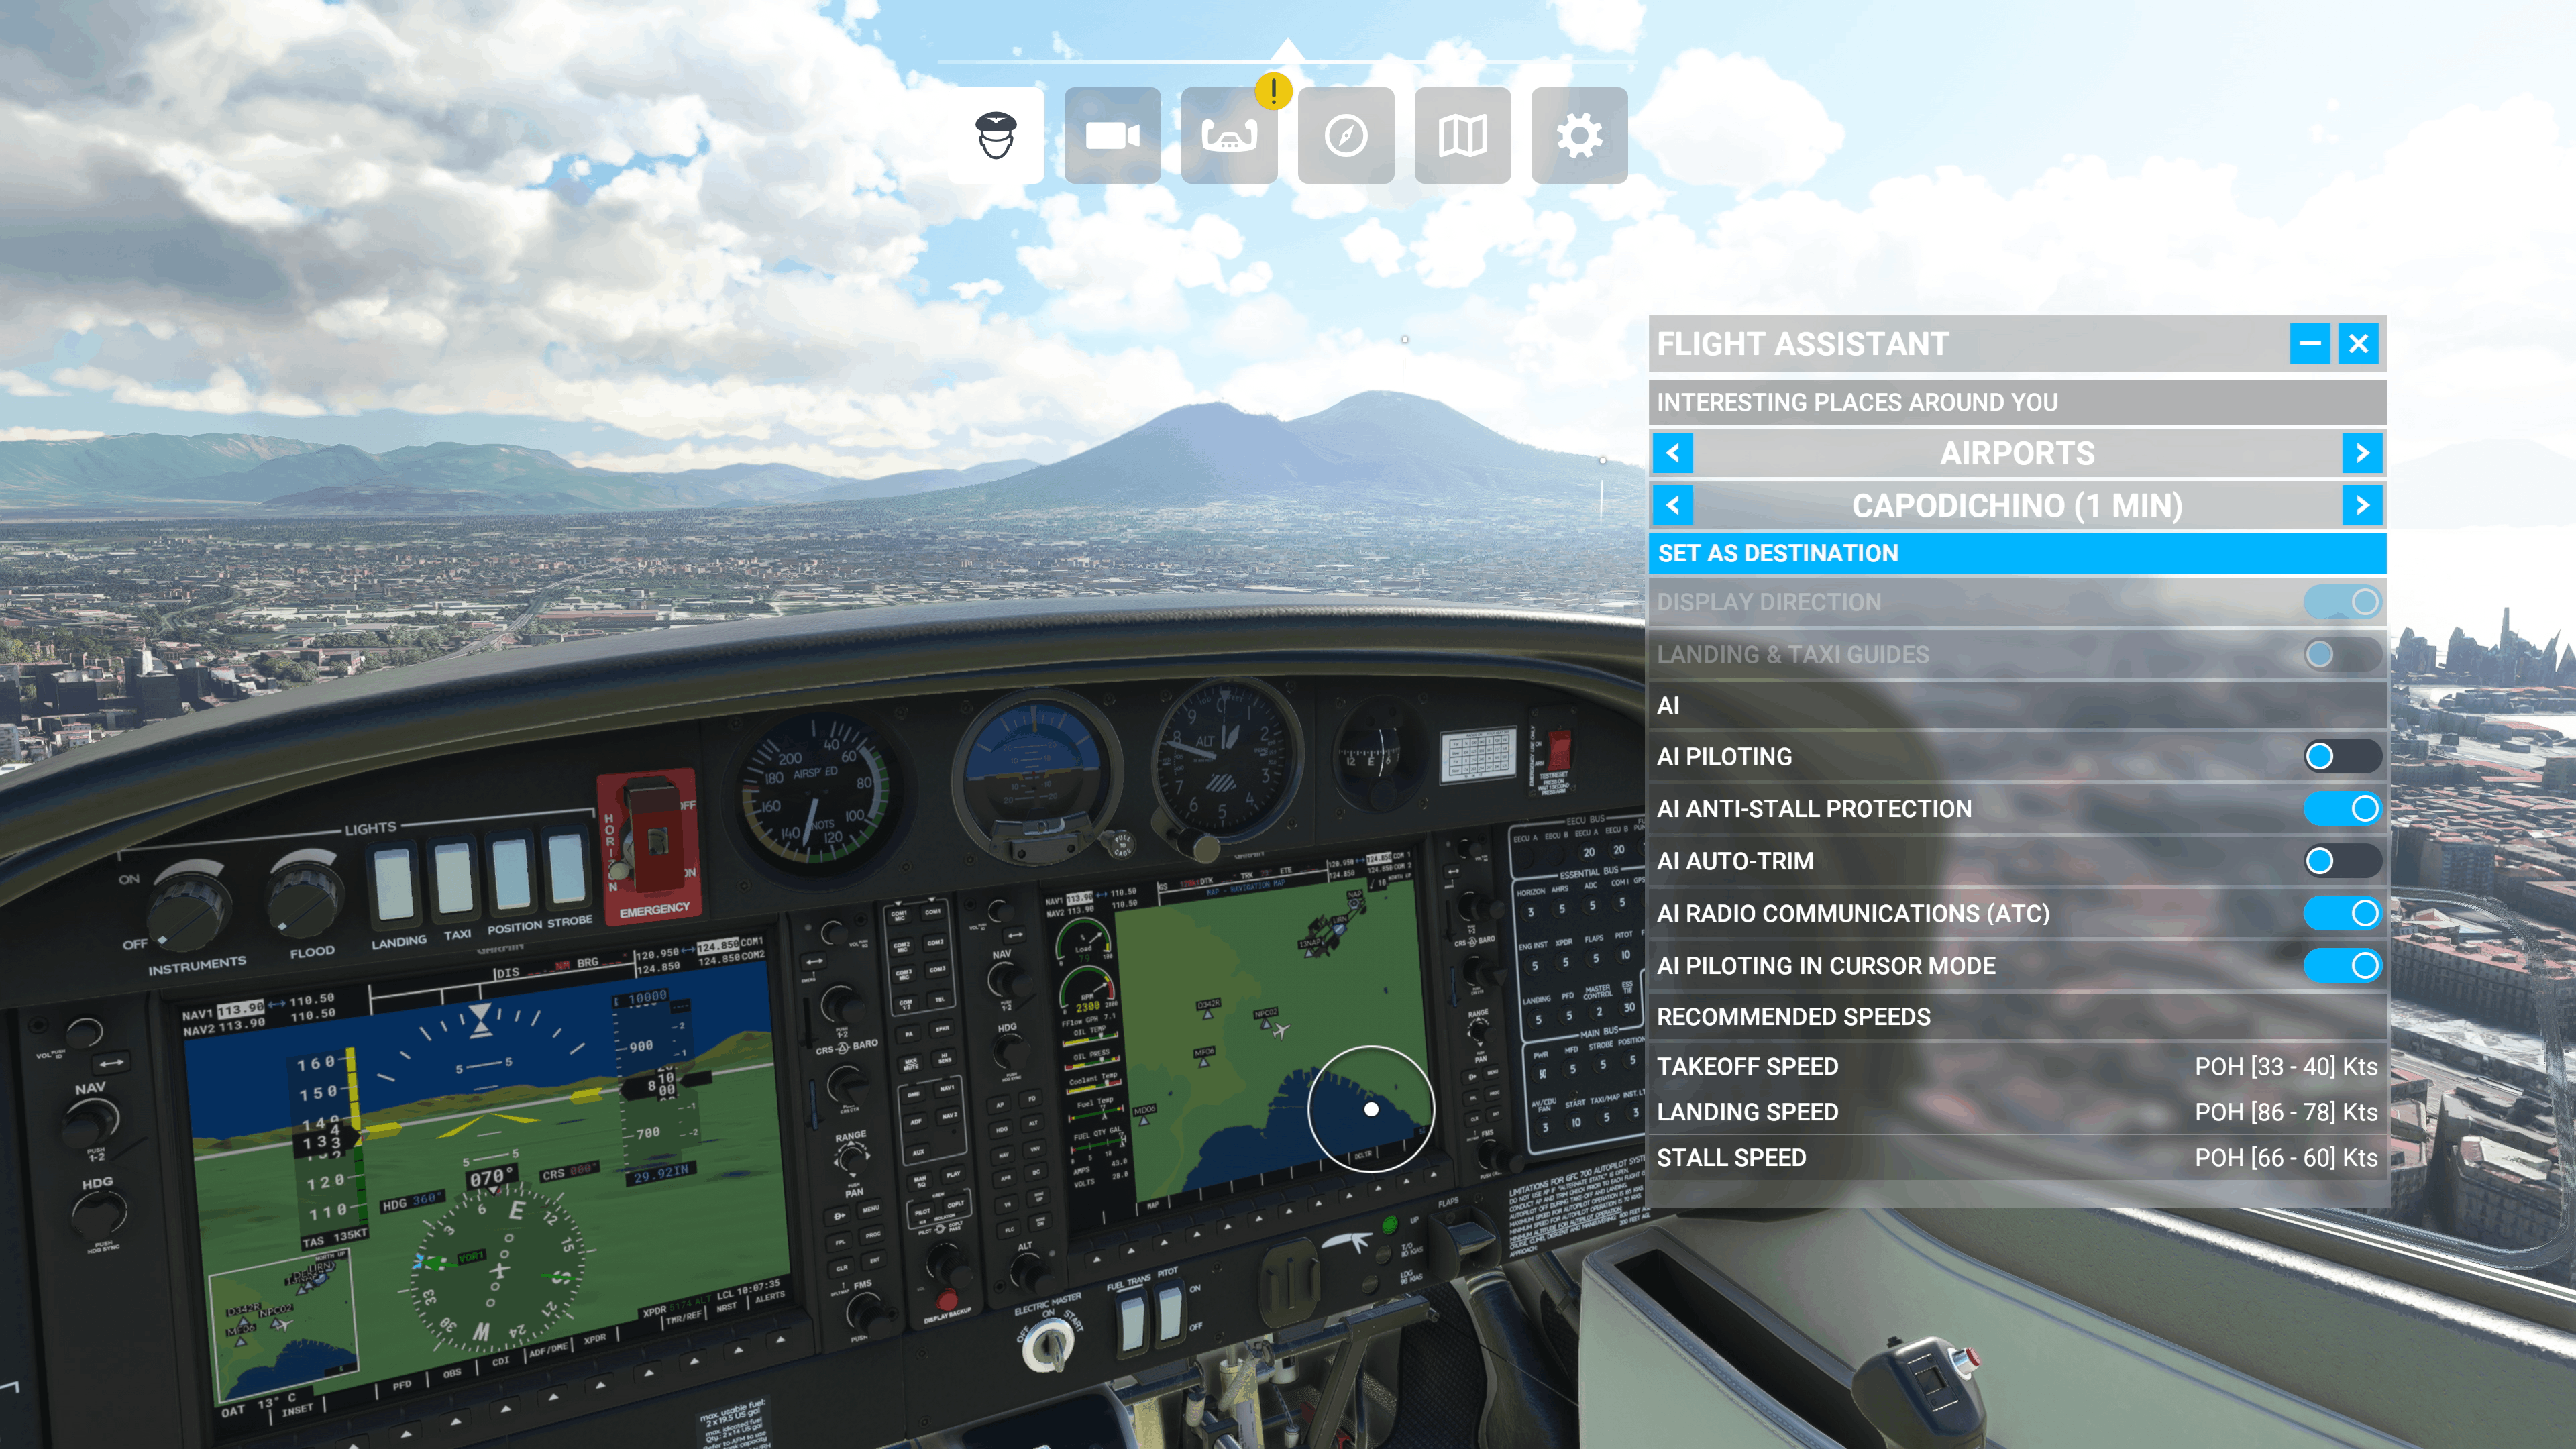 You can now play Microsoft Flight Simulator on an Xbox console